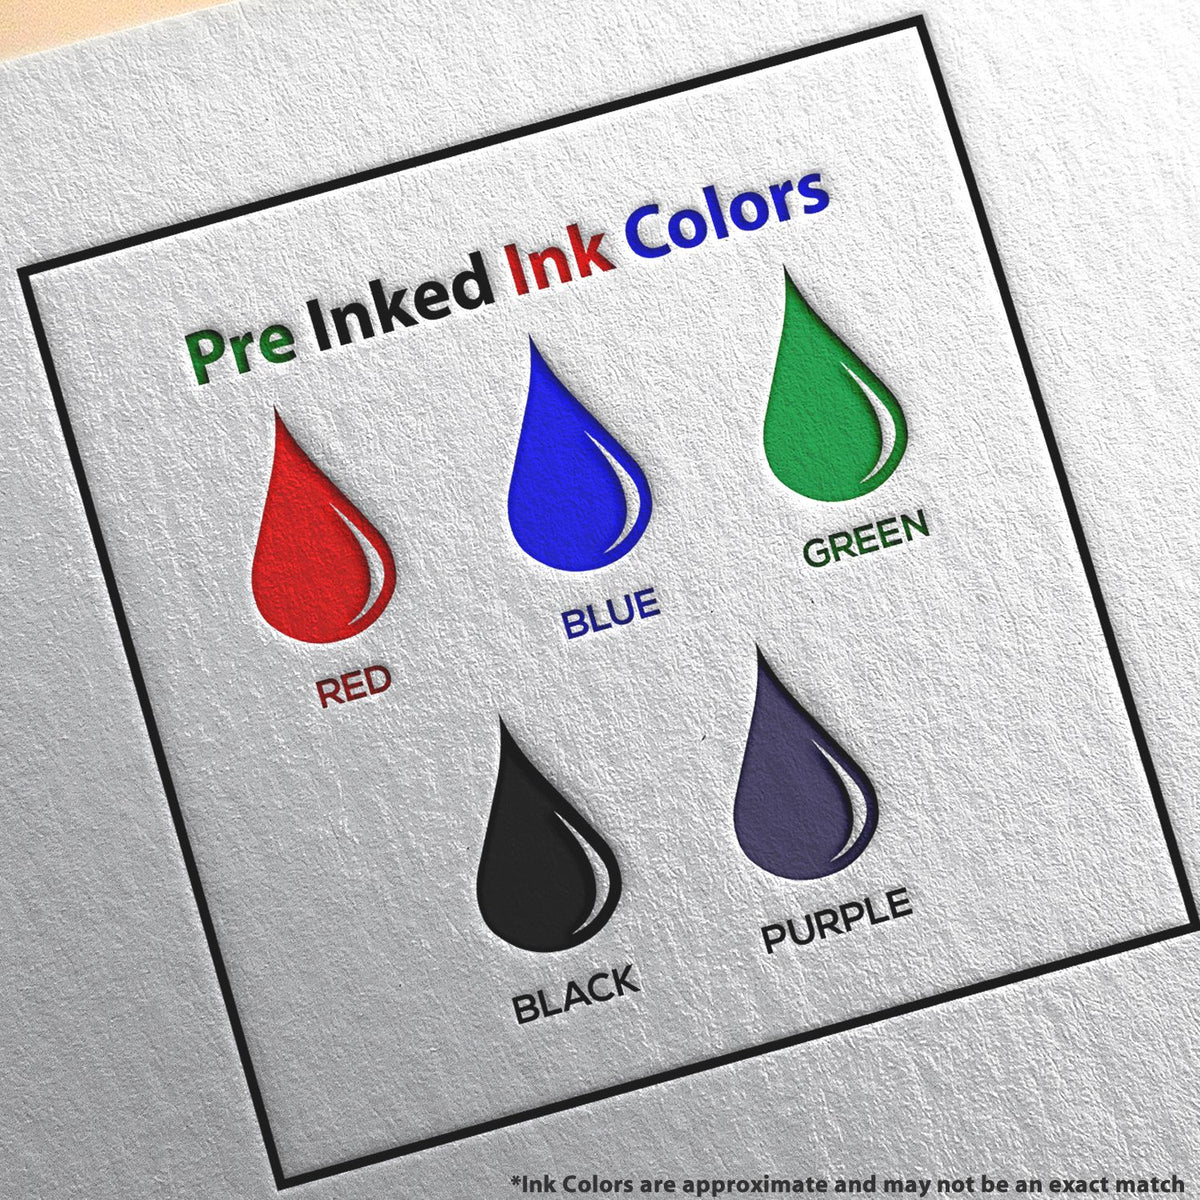 A picture showing the different ink colors or hues available for the Slim Pre-Inked Georgia Professional Engineer Seal Stamp product.